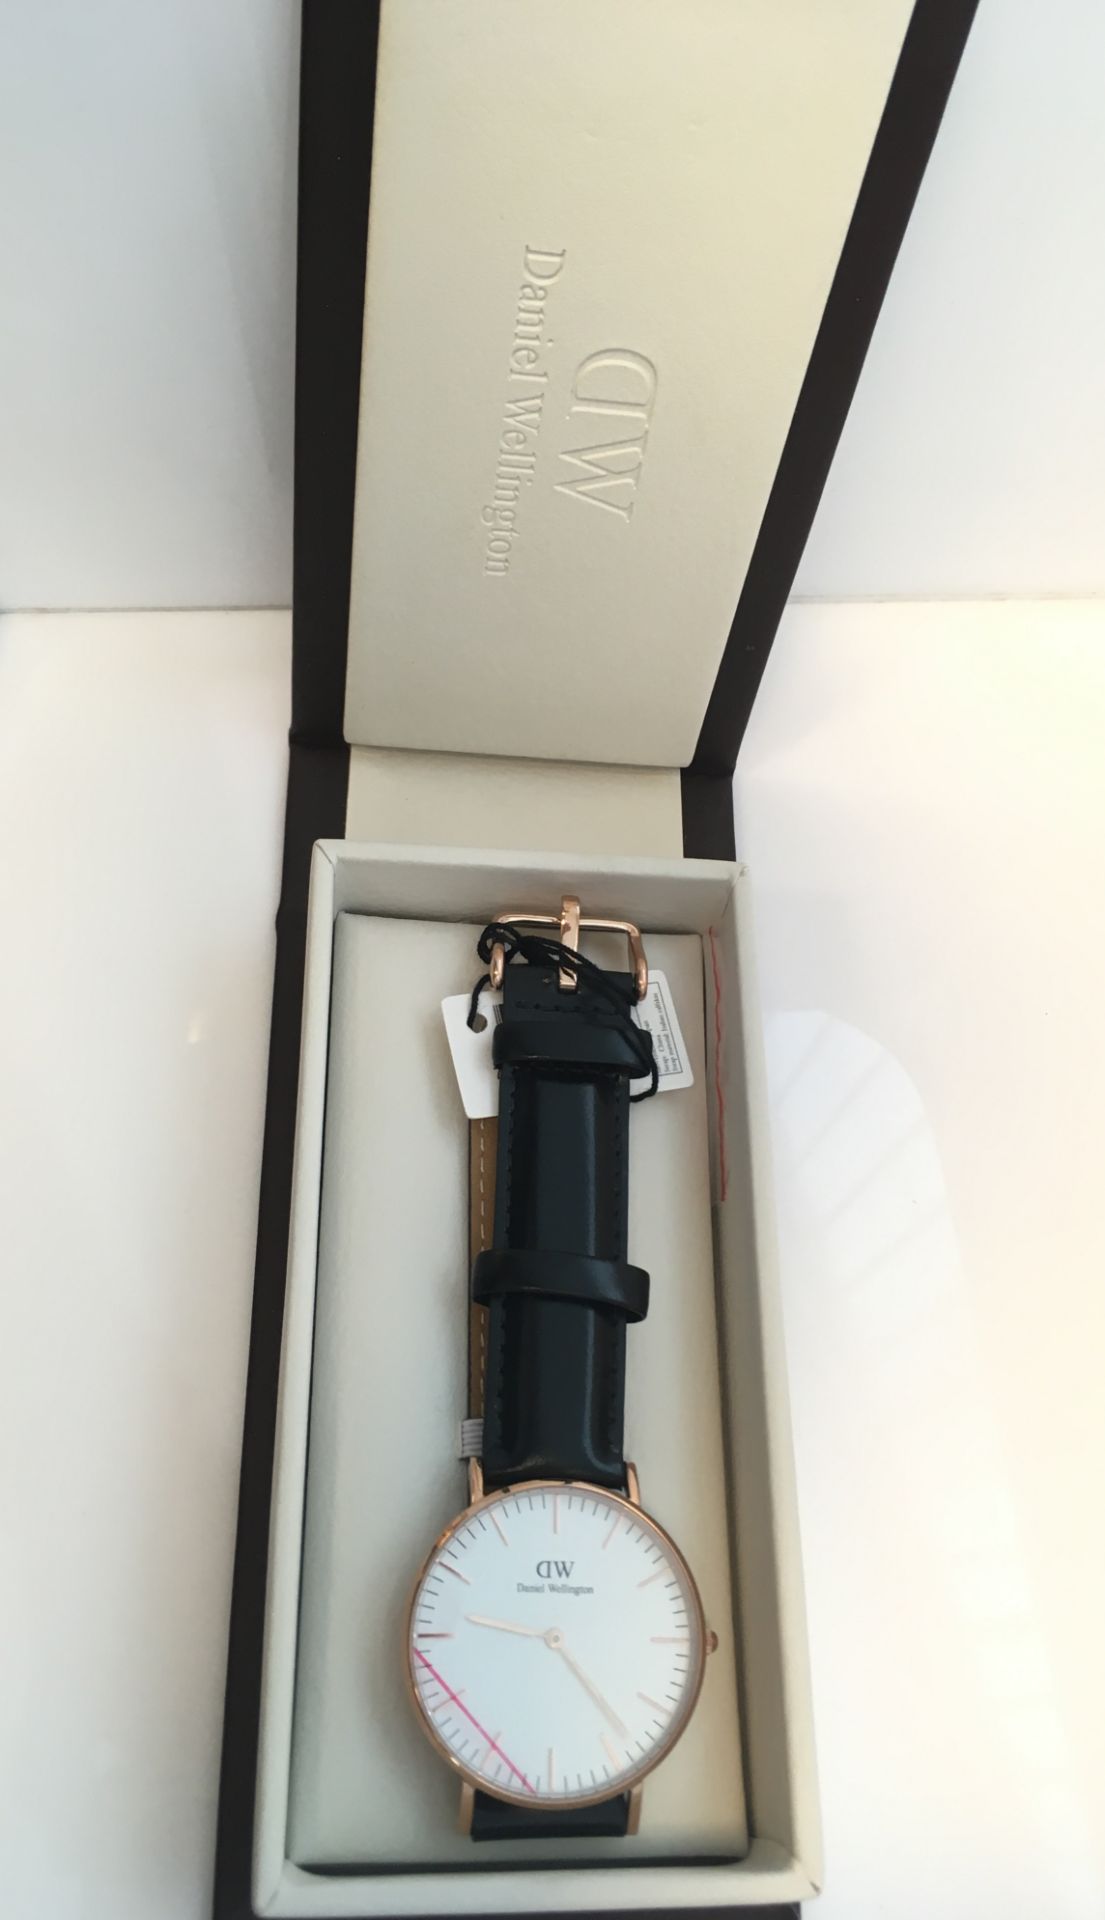 Daniel Wellington Model B36R10 Watch. Brand New in Box with Full Manual/Instructions - Image 2 of 3